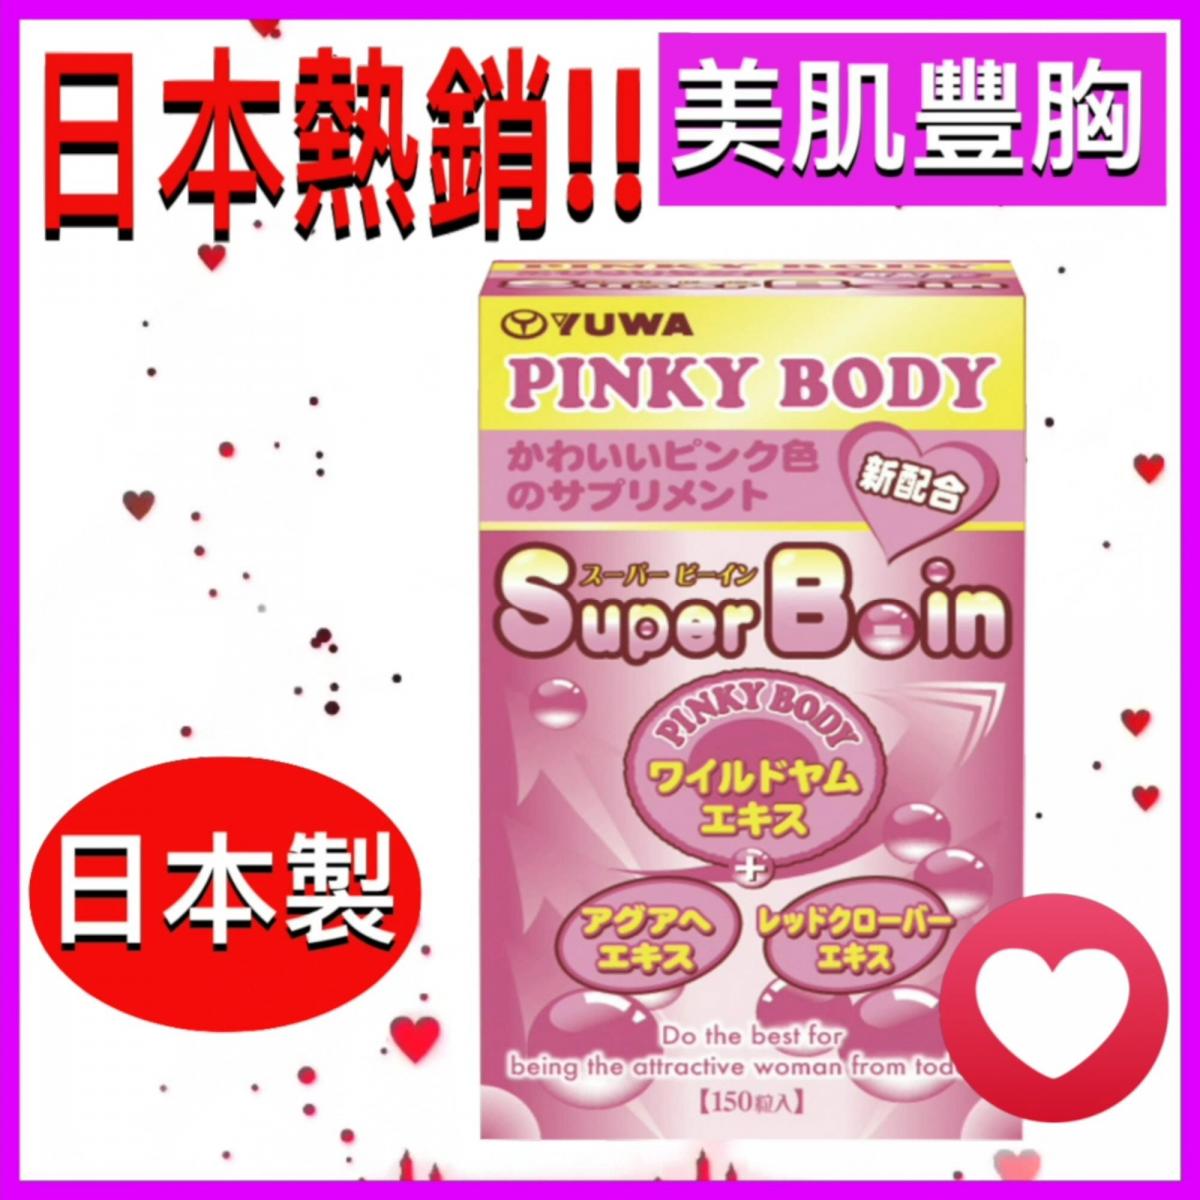 PINKY BODY Super B-in Breast Enhancement Pills 150 Tablets (Parallel Imports ) 4960867004275